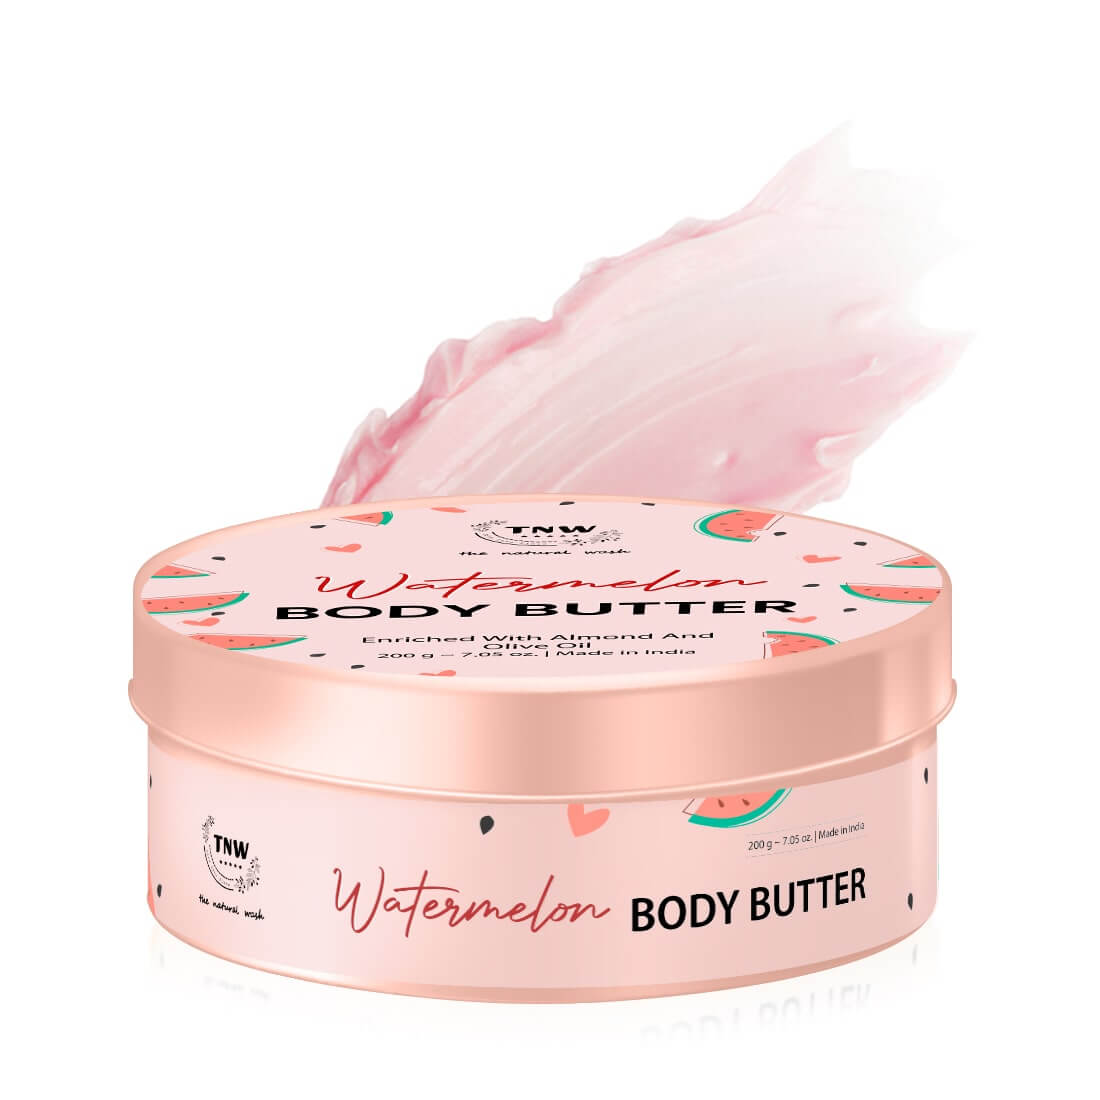 Watermelon Body Butter with Shea Butter and Olive Fruit Oil